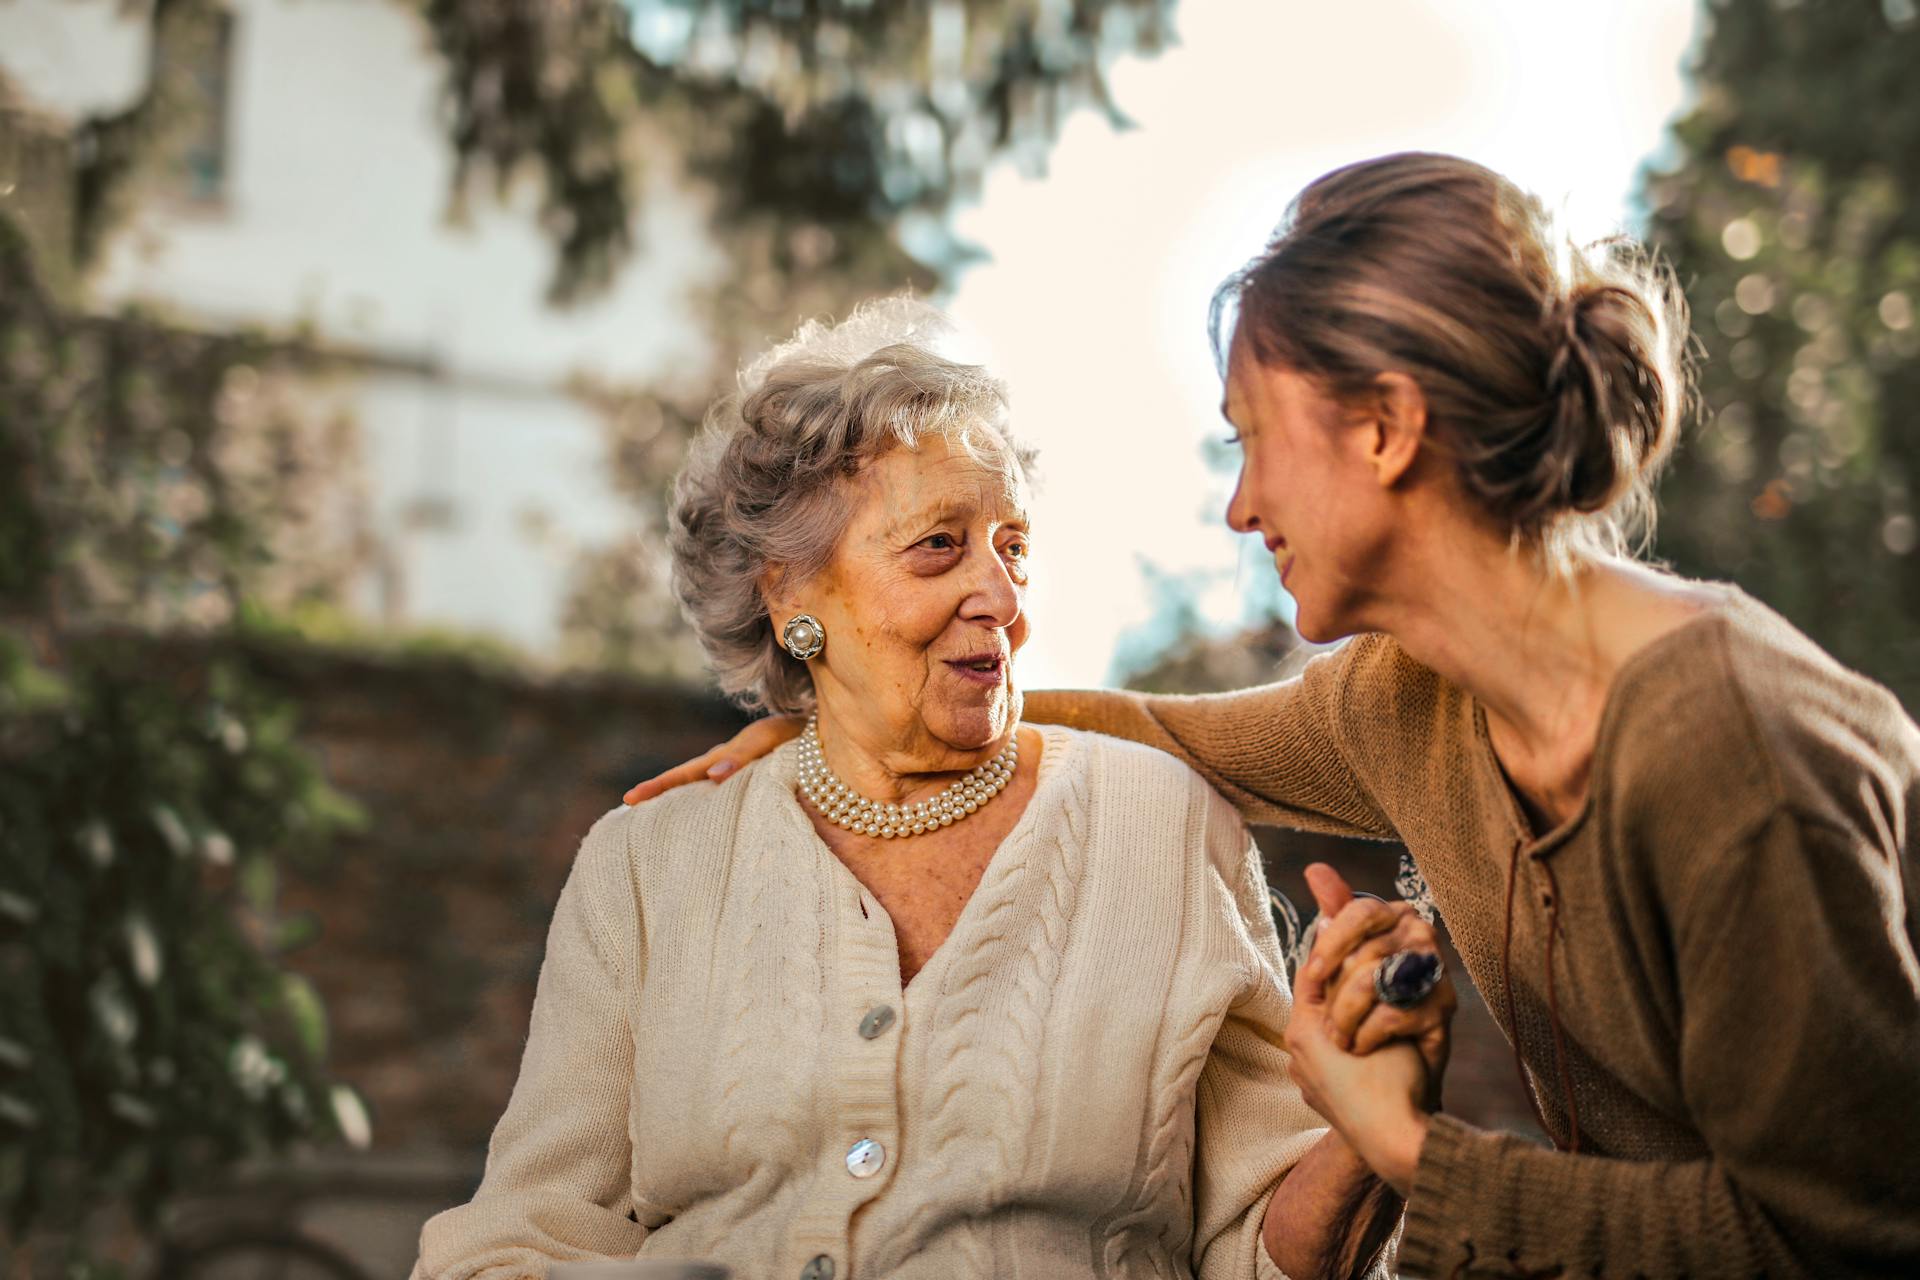 A young woman talking to an elderly woman